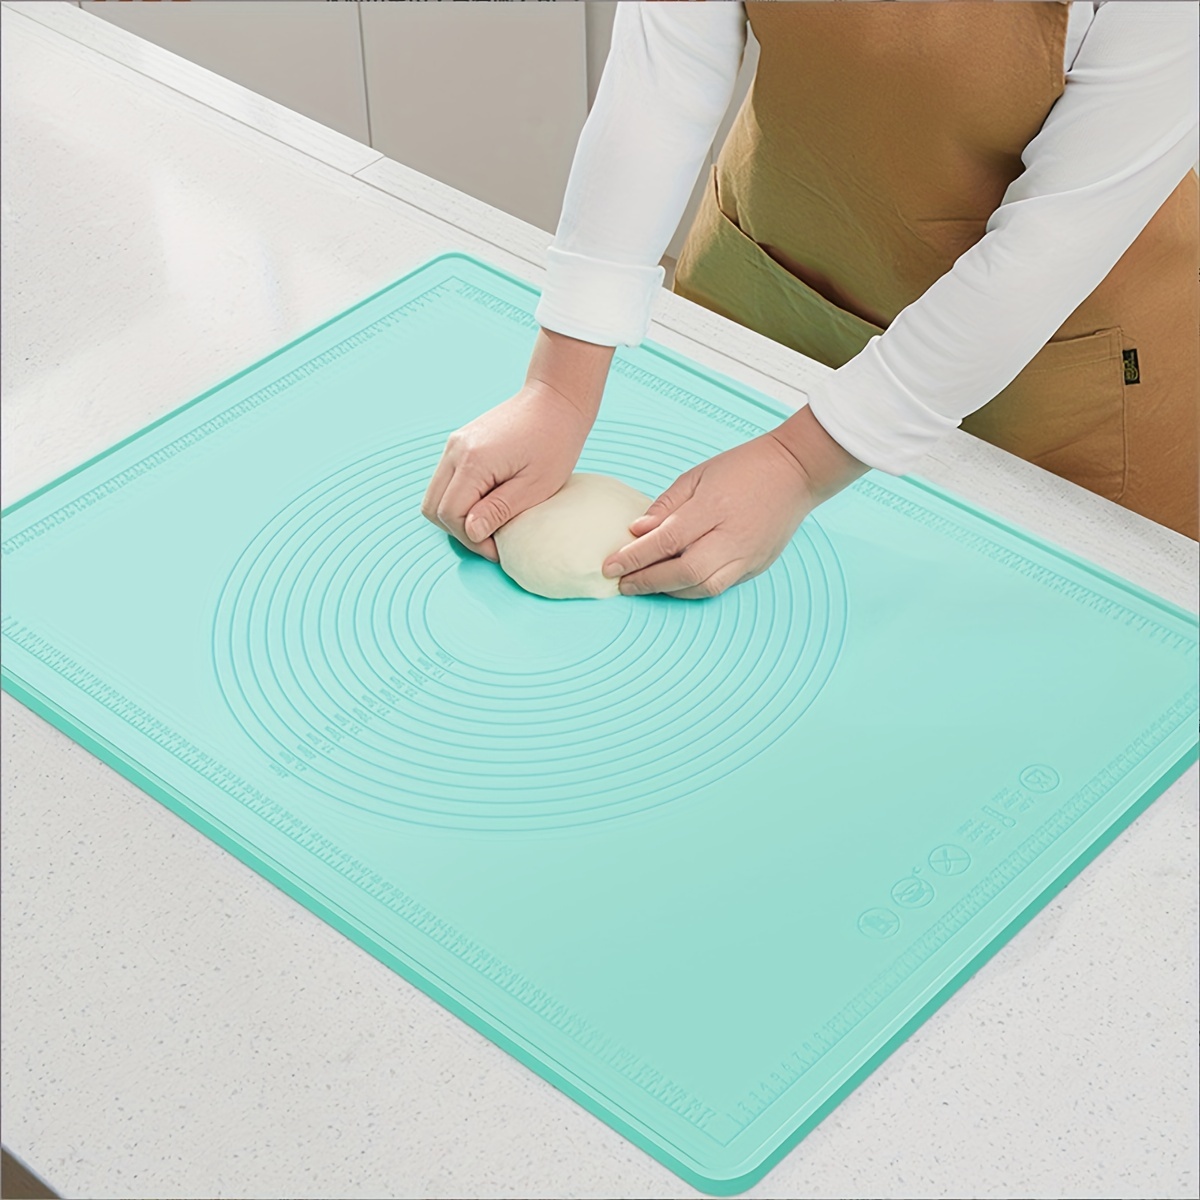  17x25 x1.2mm Silicone Mats for Kitchen Counter, Non-slip  Waterproof Large Countertop Protector Mat, Heat Resistant Mat (Translucent,  1 Pack): Home & Kitchen